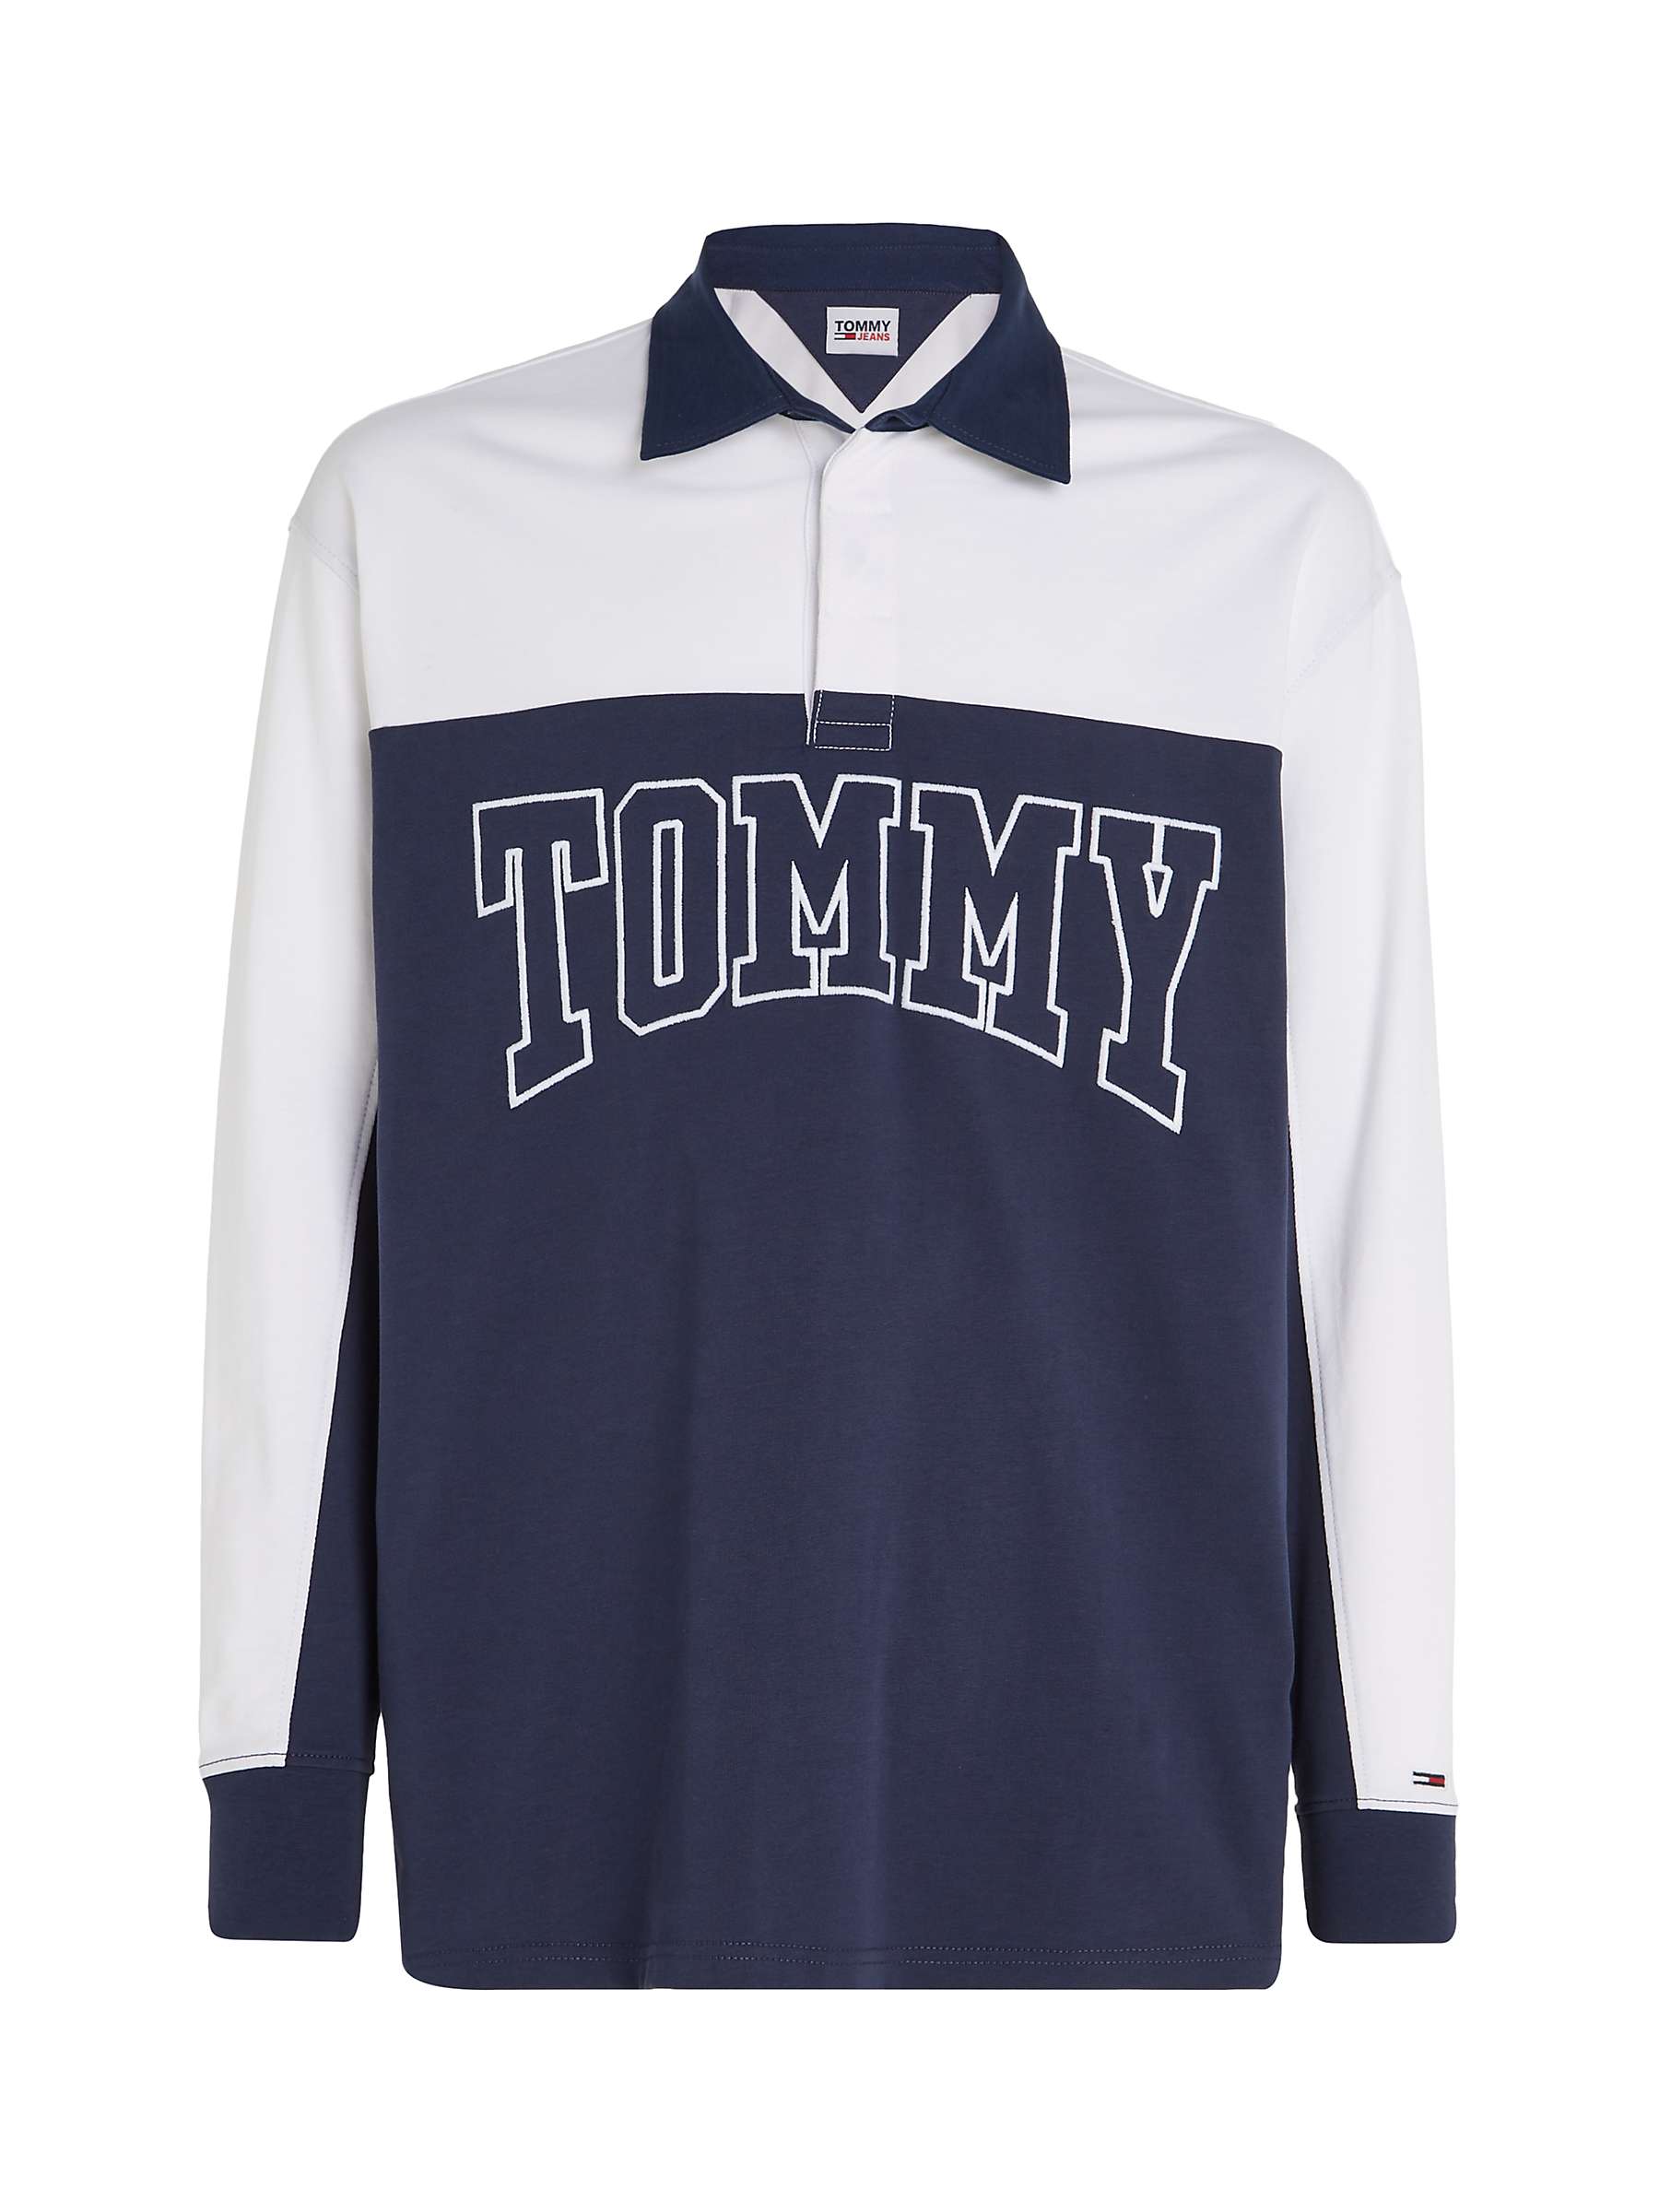 Buy Tommy Jeans Oversize Rugby Shirt, Navy/Multi Online at johnlewis.com